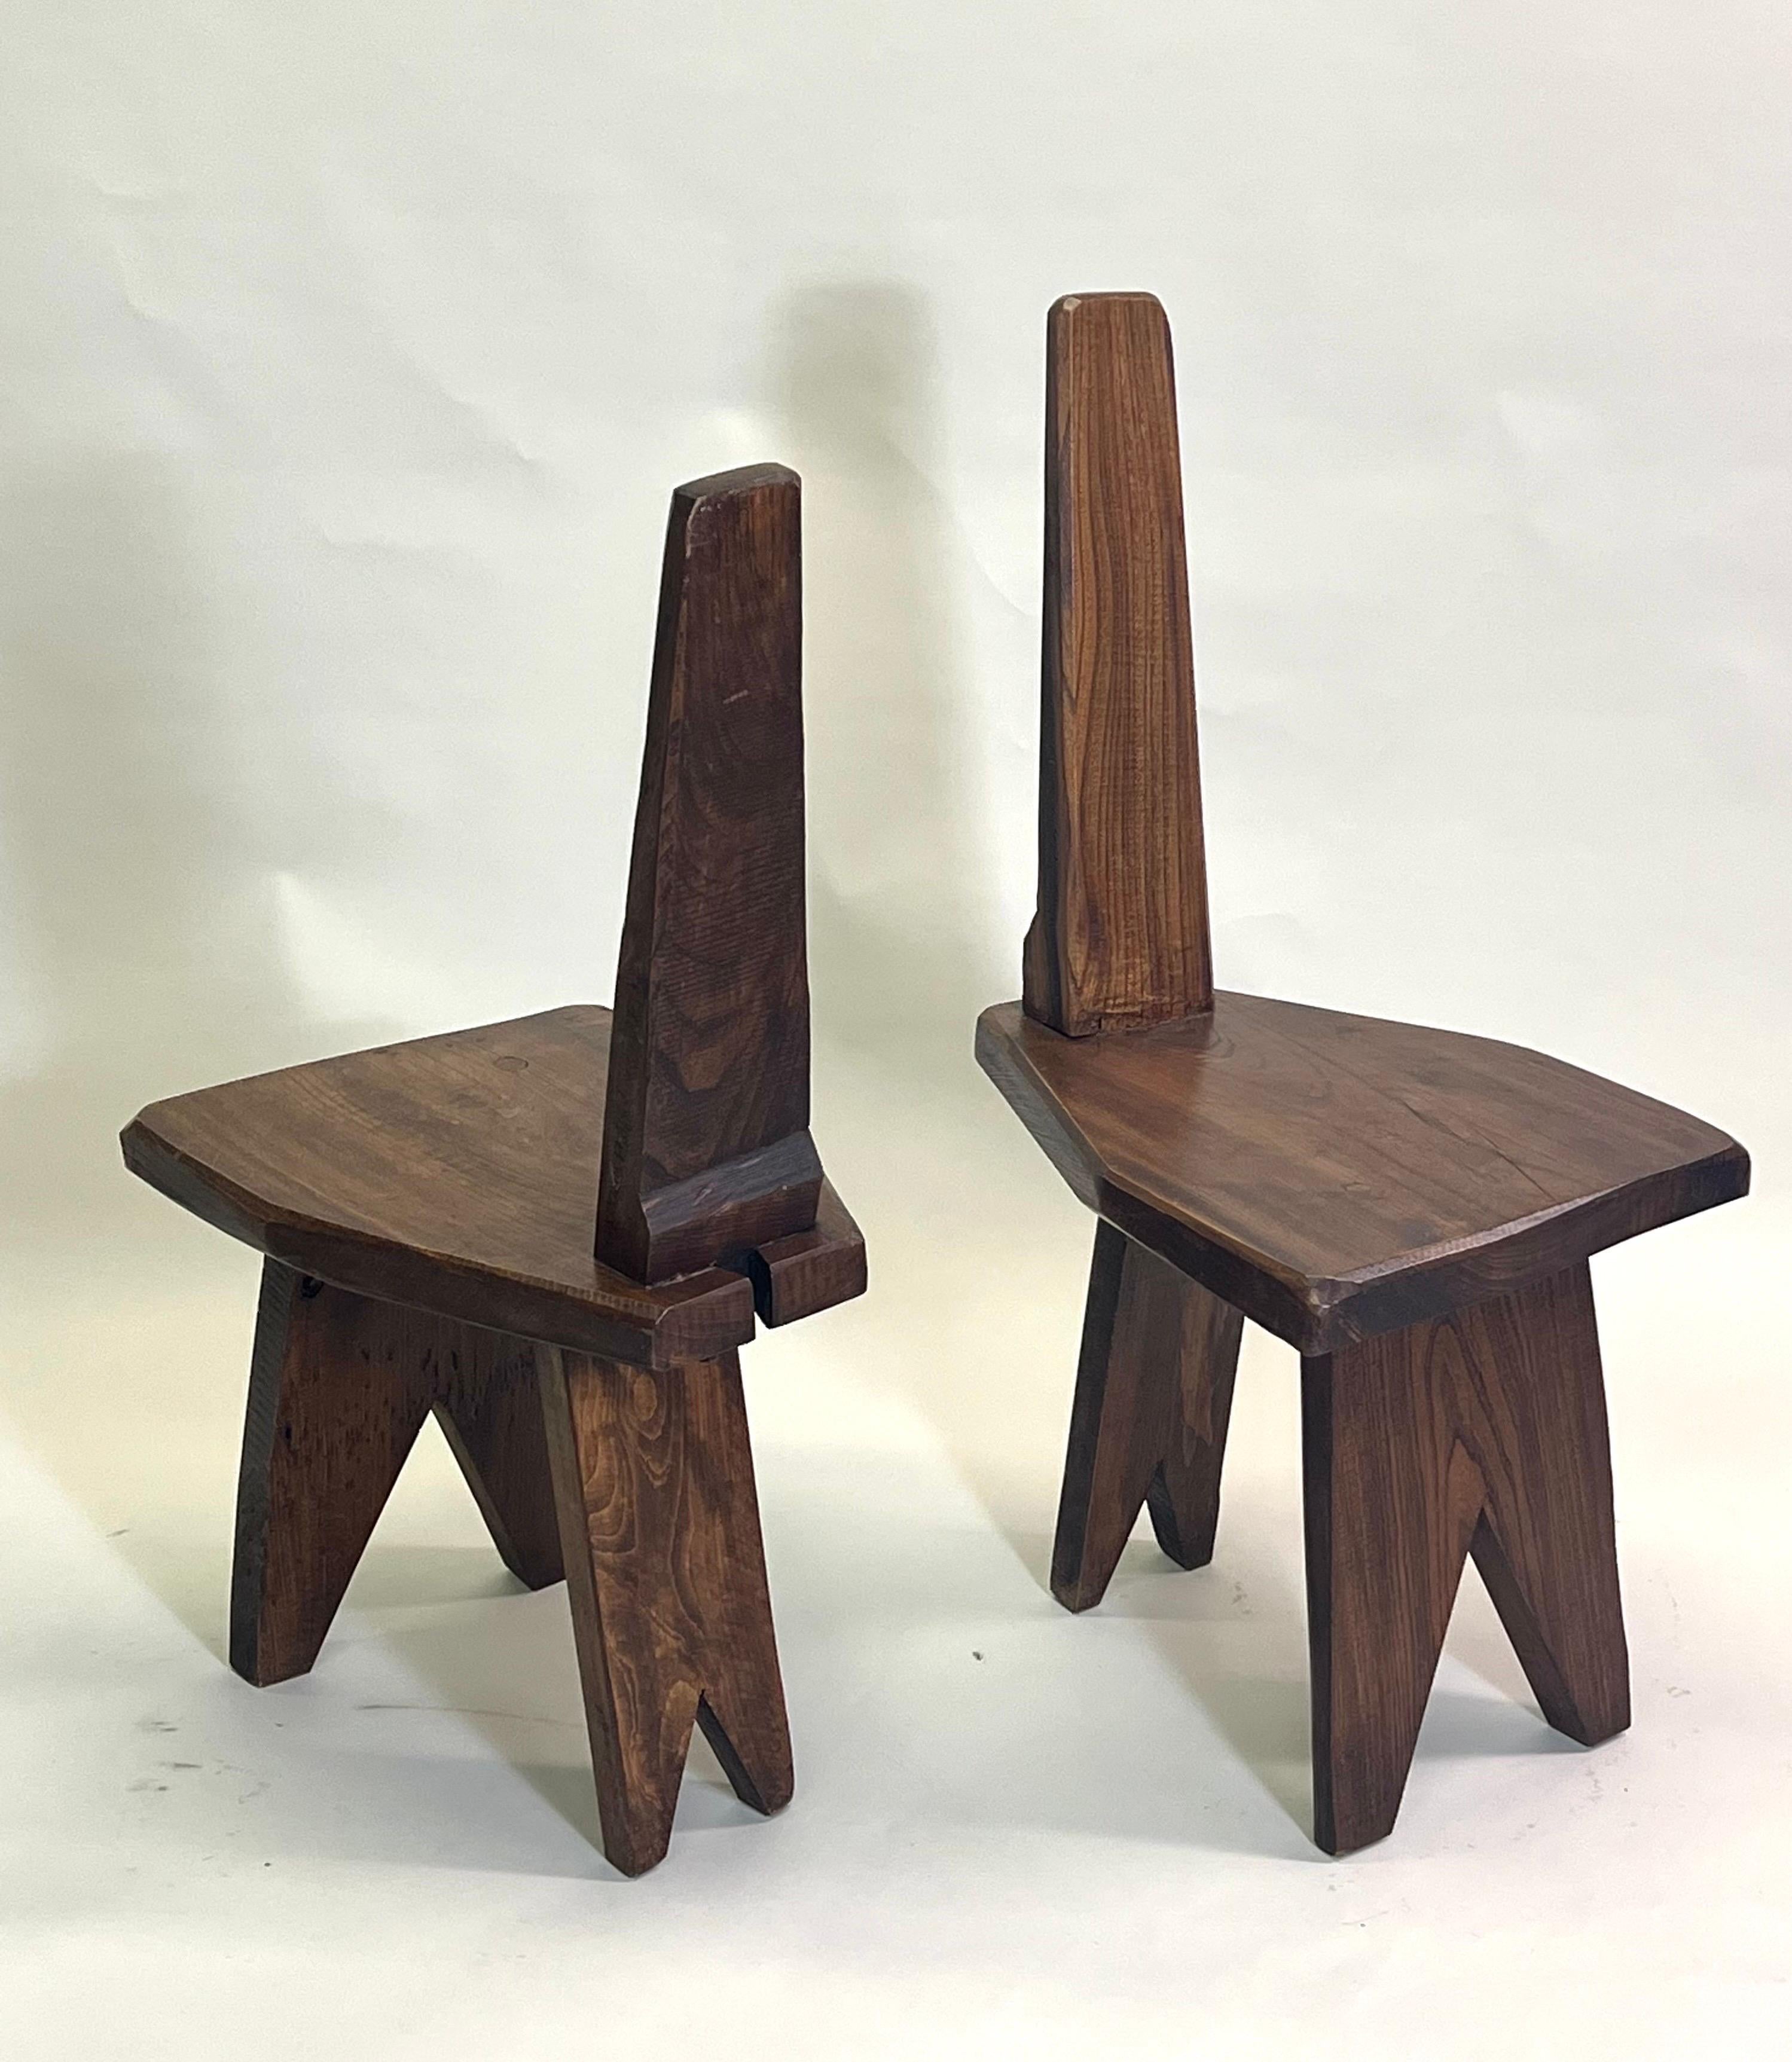 An Elegant Pair of French Mid-Century Modern Craftsman Side or Lounge Chairs in the style of Pierre Jeanneret. The chairs are an original, handmade creation from the 1960 - 1970 period in France. They possess a singular sense of form, line and